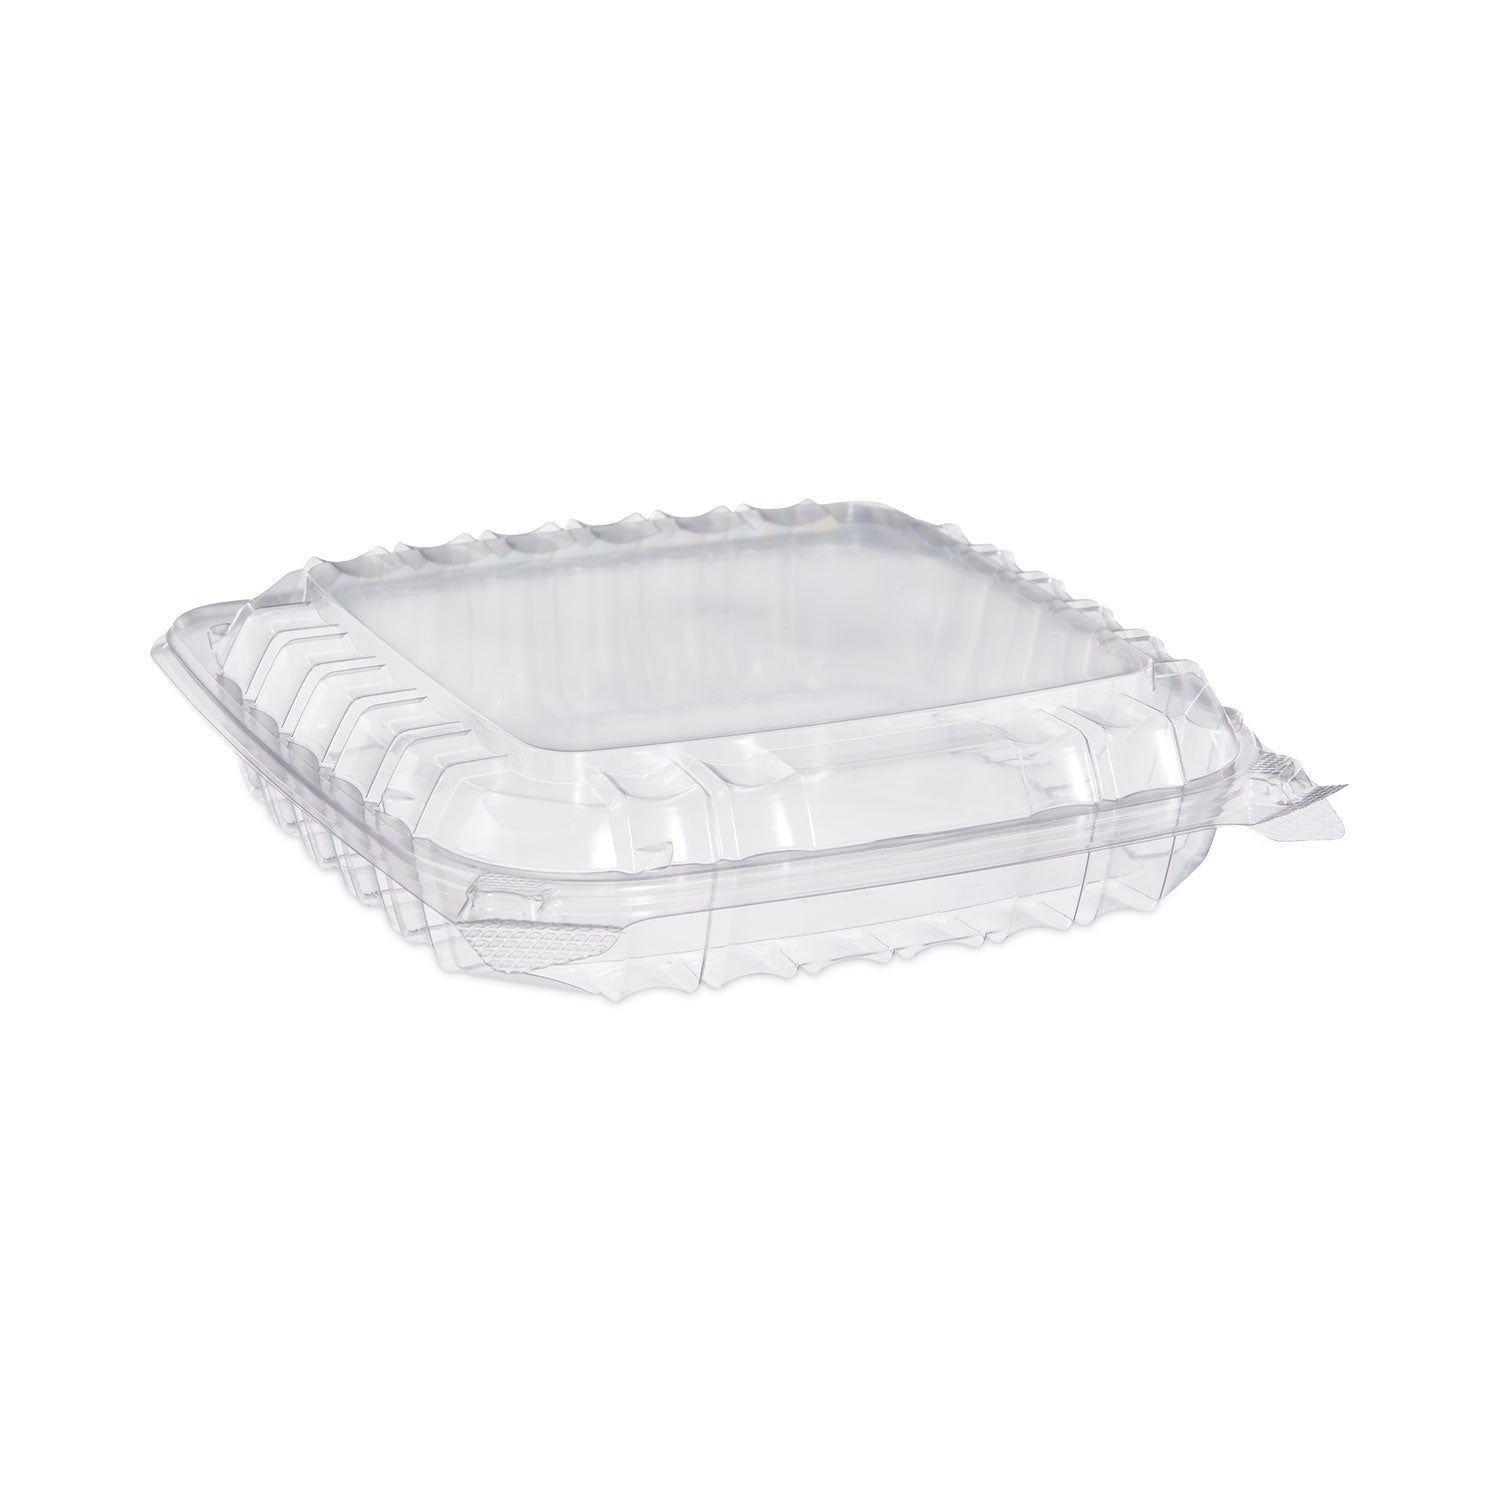 ClearSeal Hinged-Lid Plastic Containers, 8.31 x 8.31 x 2, Clear, Plastic, 125/Bag, 2 Bags/Carton - 